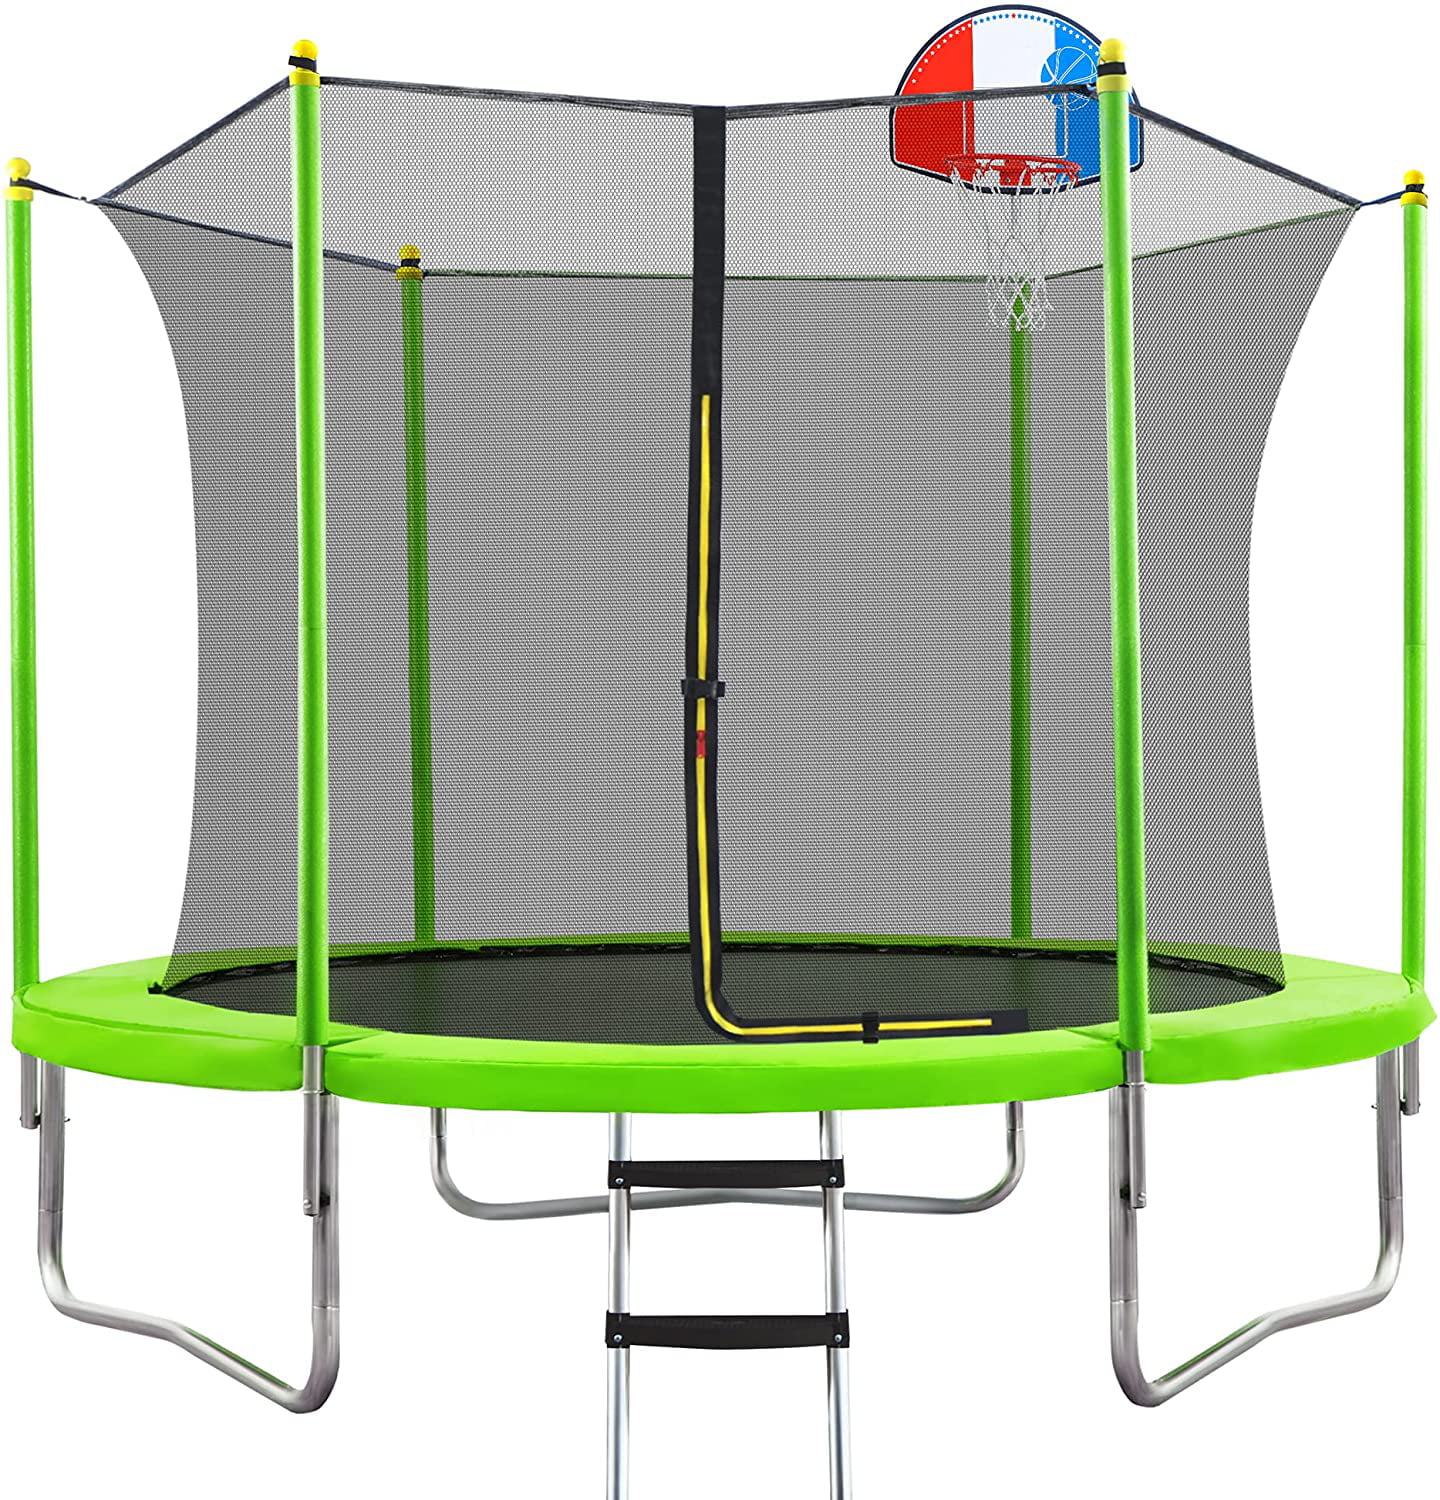 10ft Trampoline With Basketball HoopPick up for sale online 